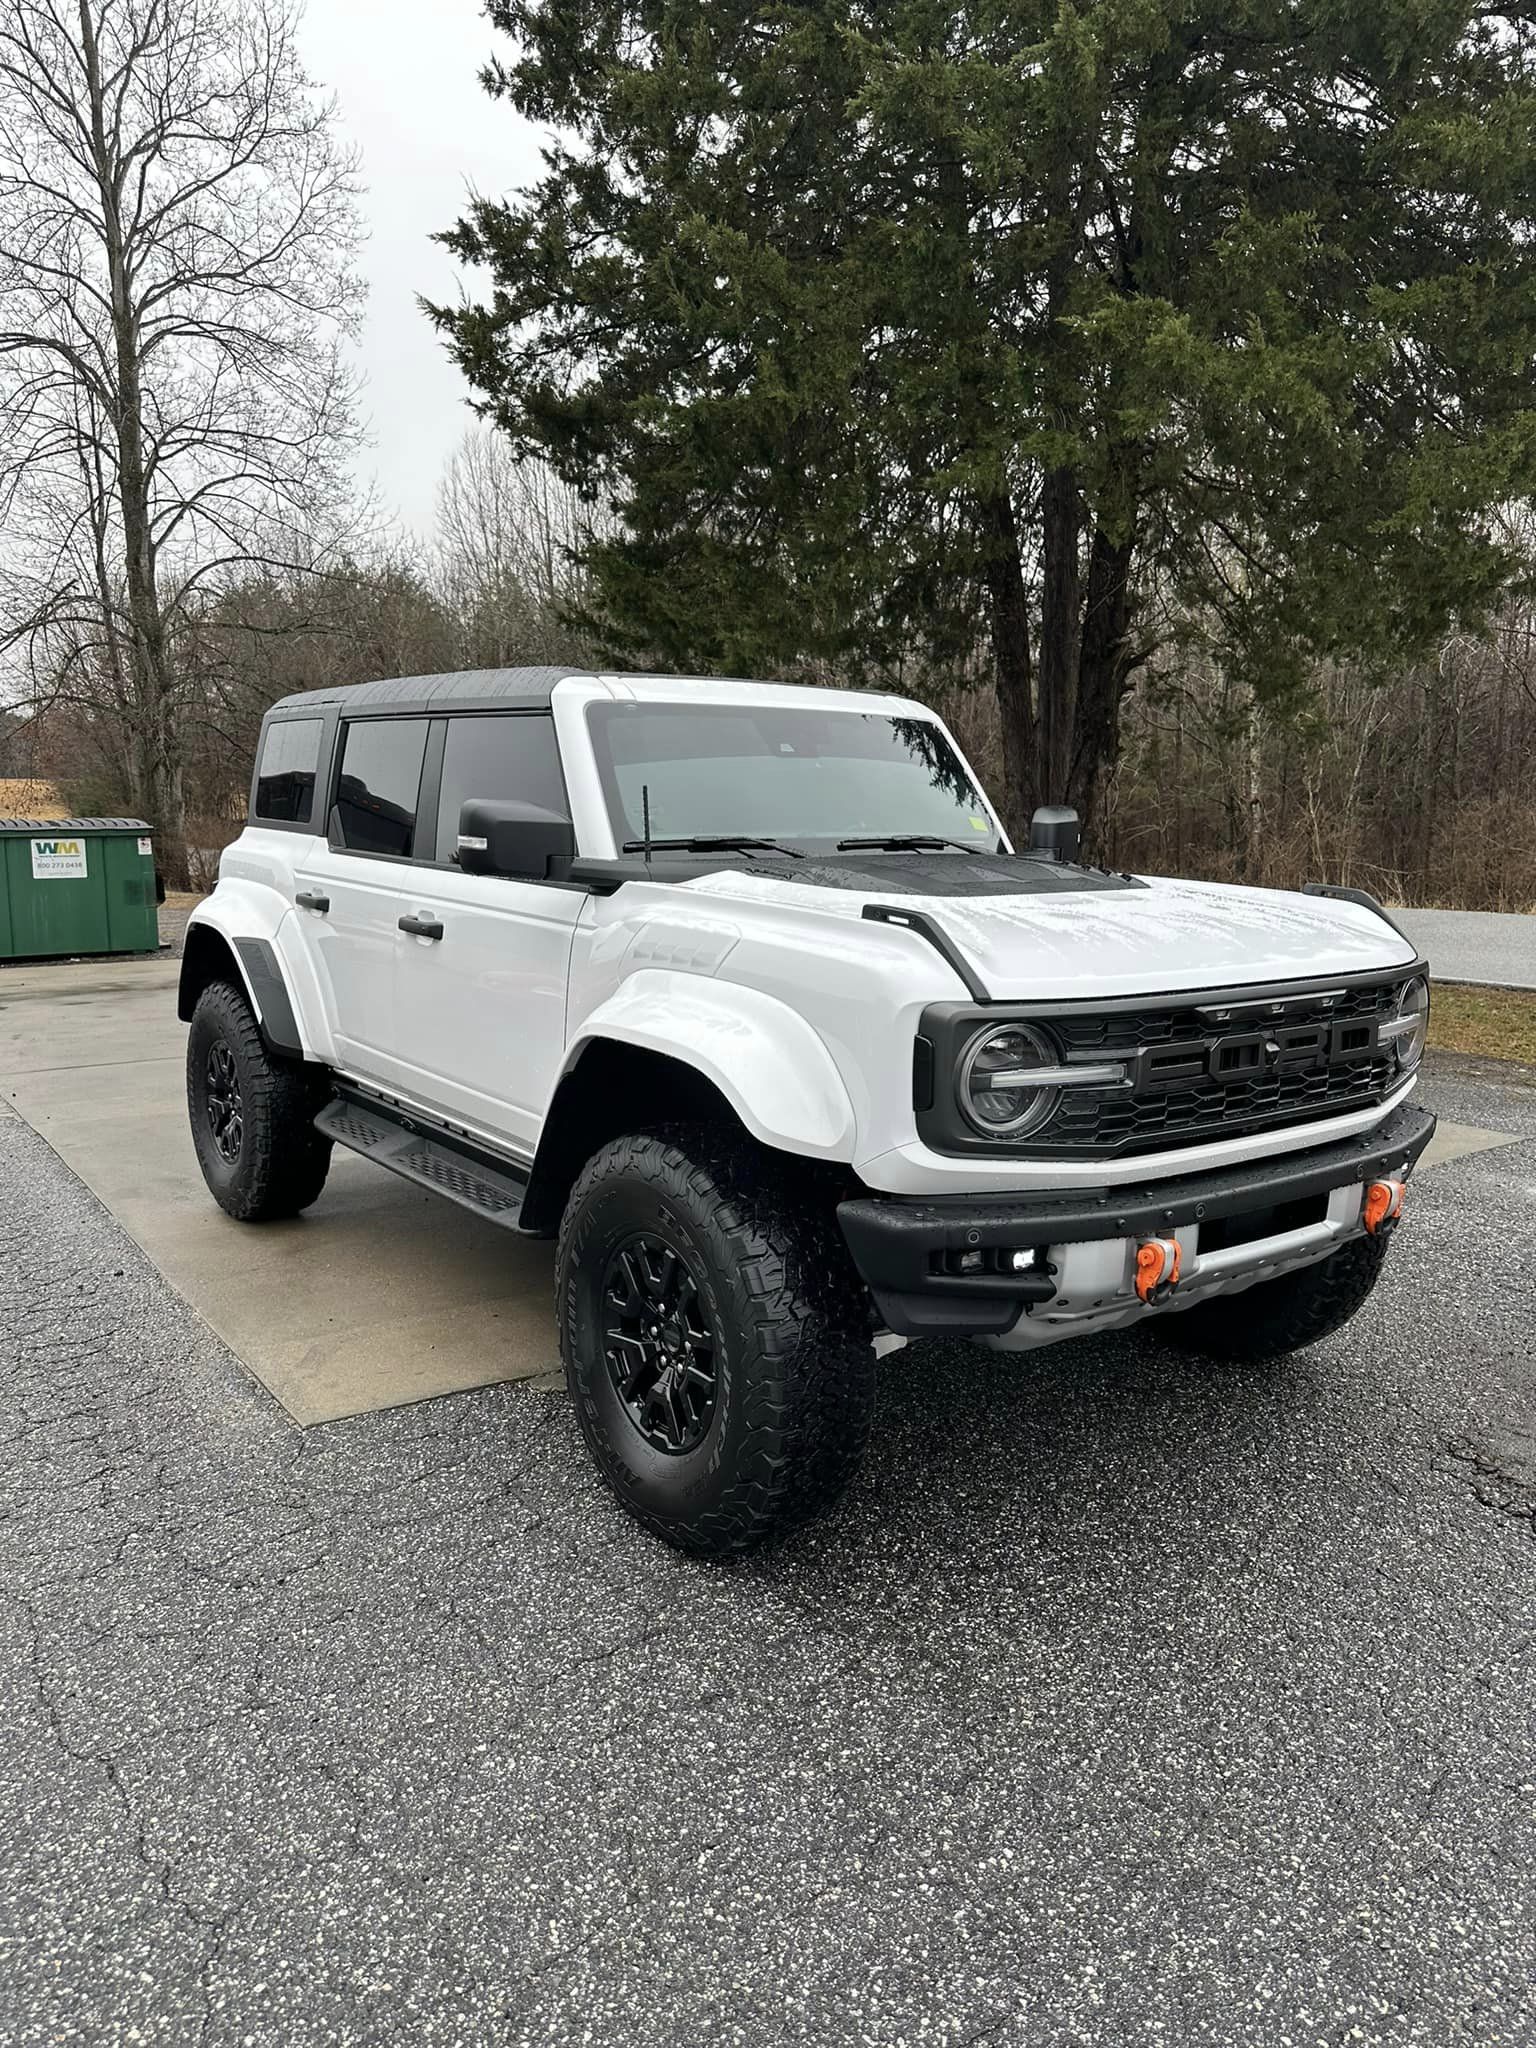 Ford Bronco What Did You Do To Your Bronco Raptor Today? 🔧 🧰 🪛 43C55228-2BDF-4F3B-A32A-9947B1FC751C